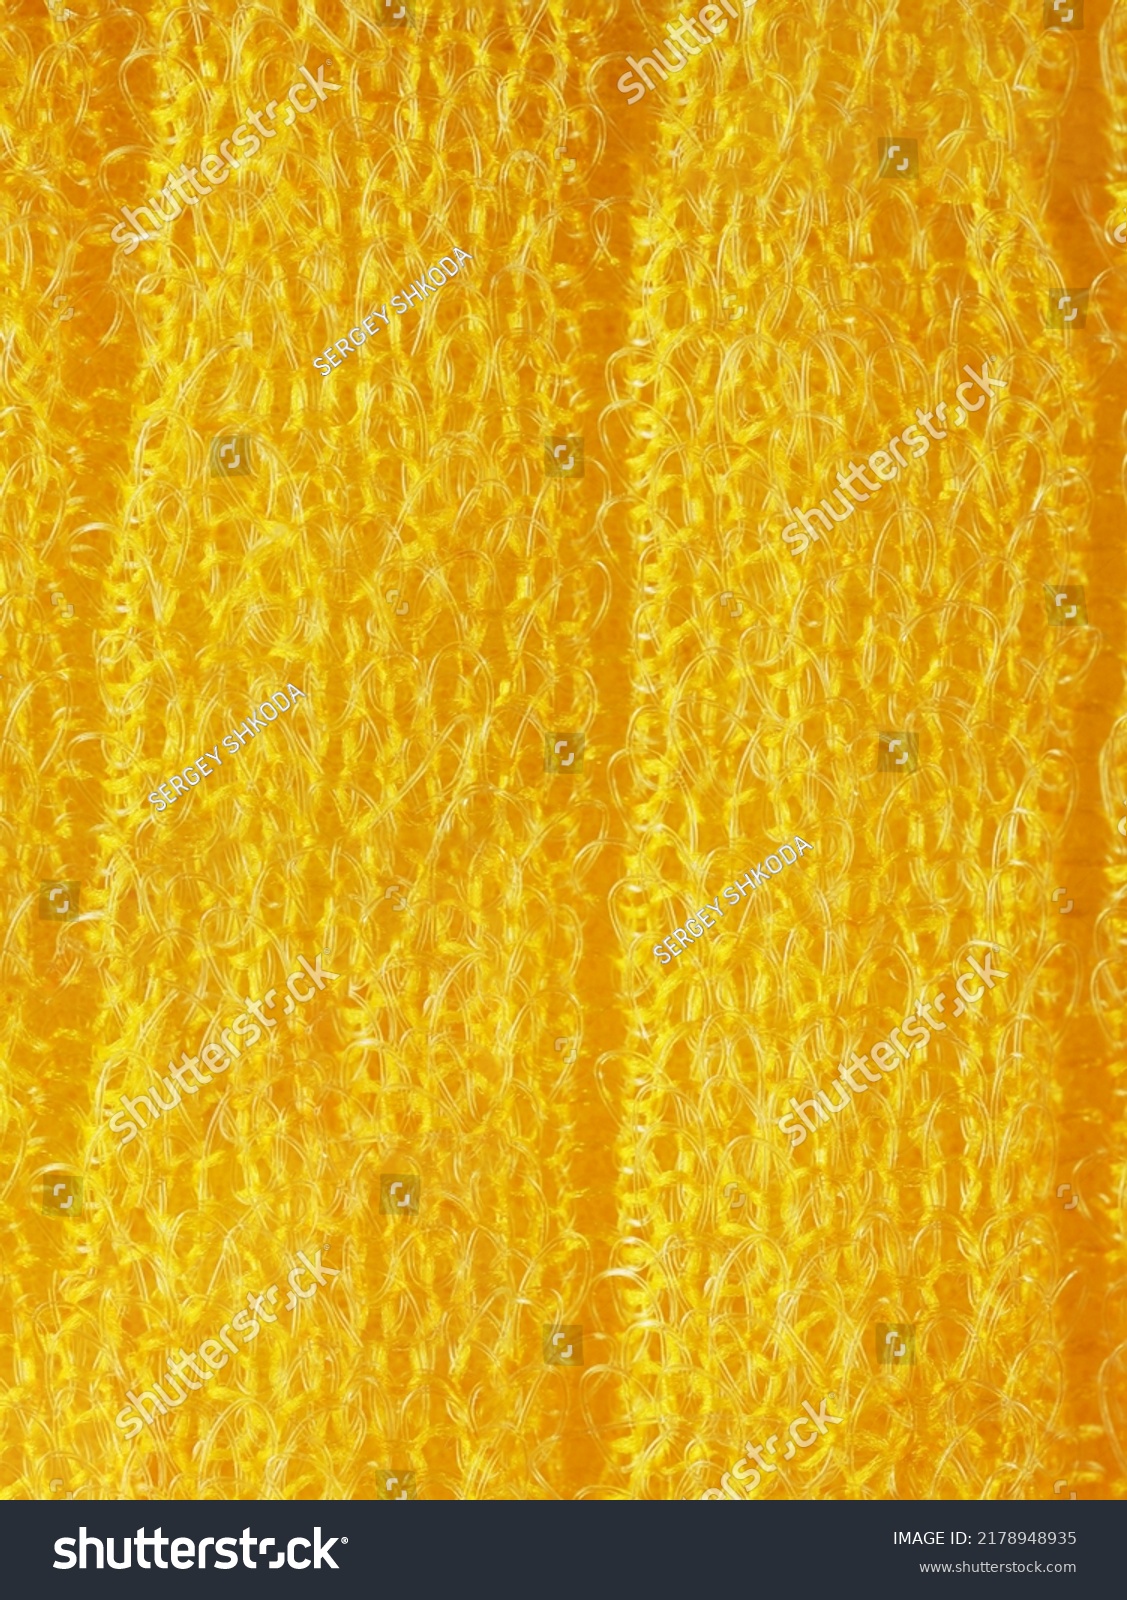 closeup, background, texture, large long vertical banner. heterogeneous surface structure bright saturated yellow sponge for washing dishes, kitchen, bath. full depth of field. high resolution photo #2178948935